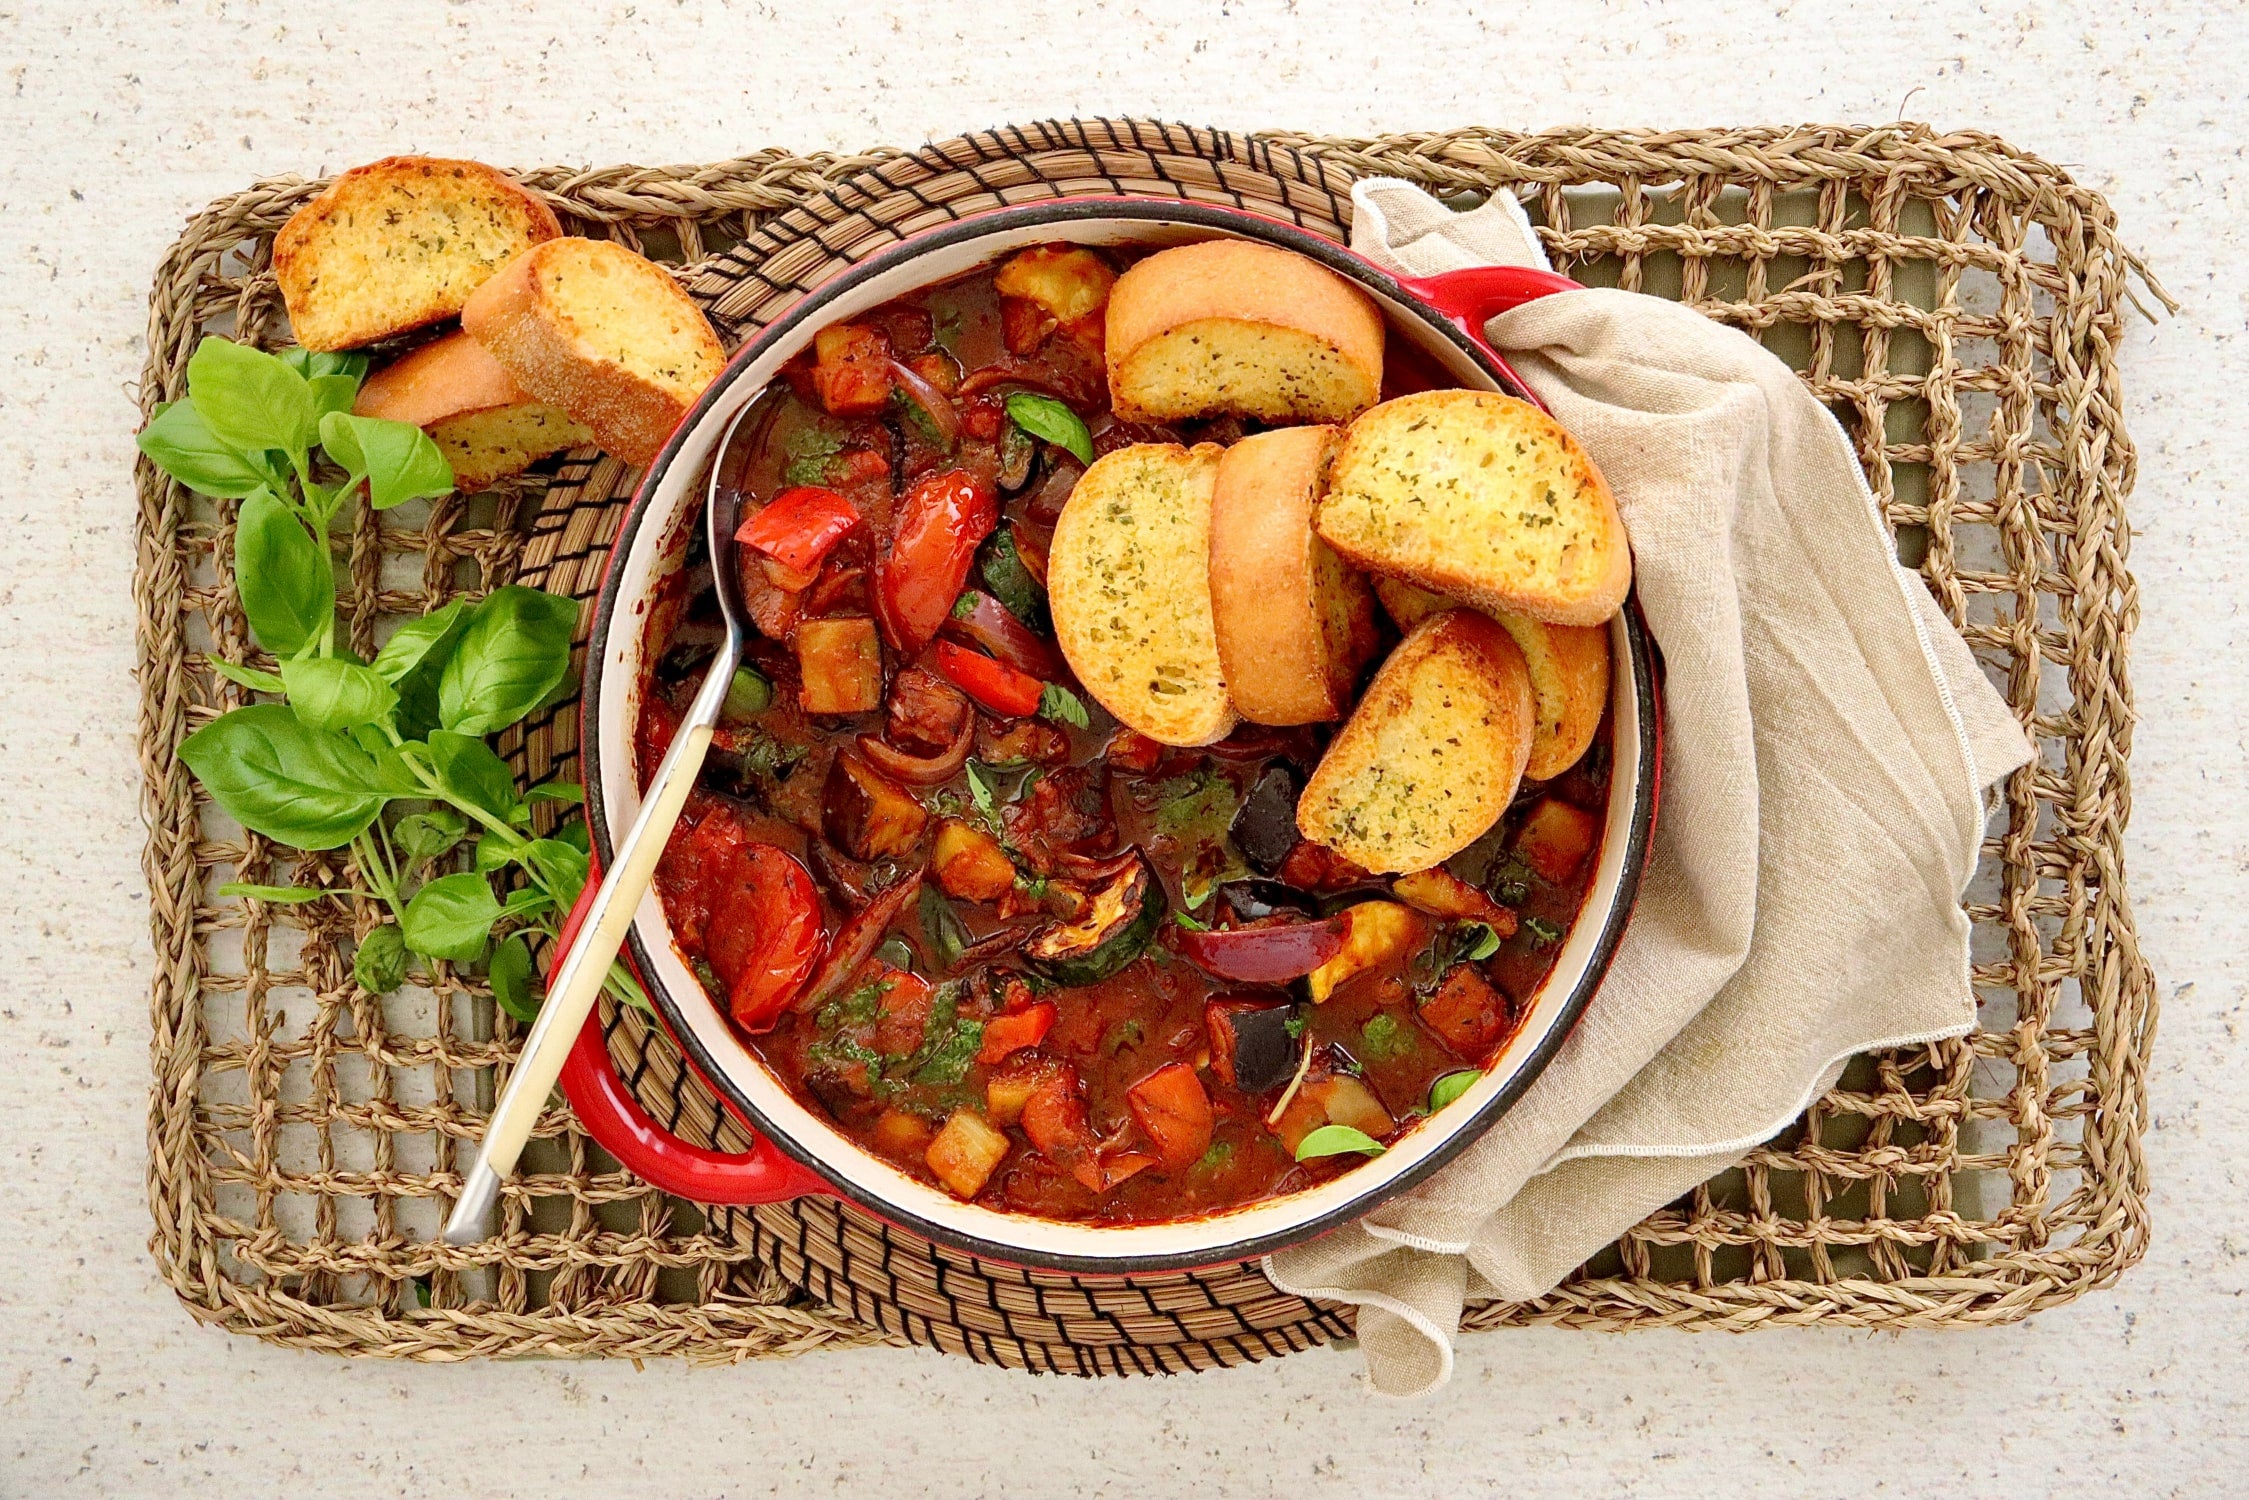 Bowl of ratatouille topped with garlic bread and basil